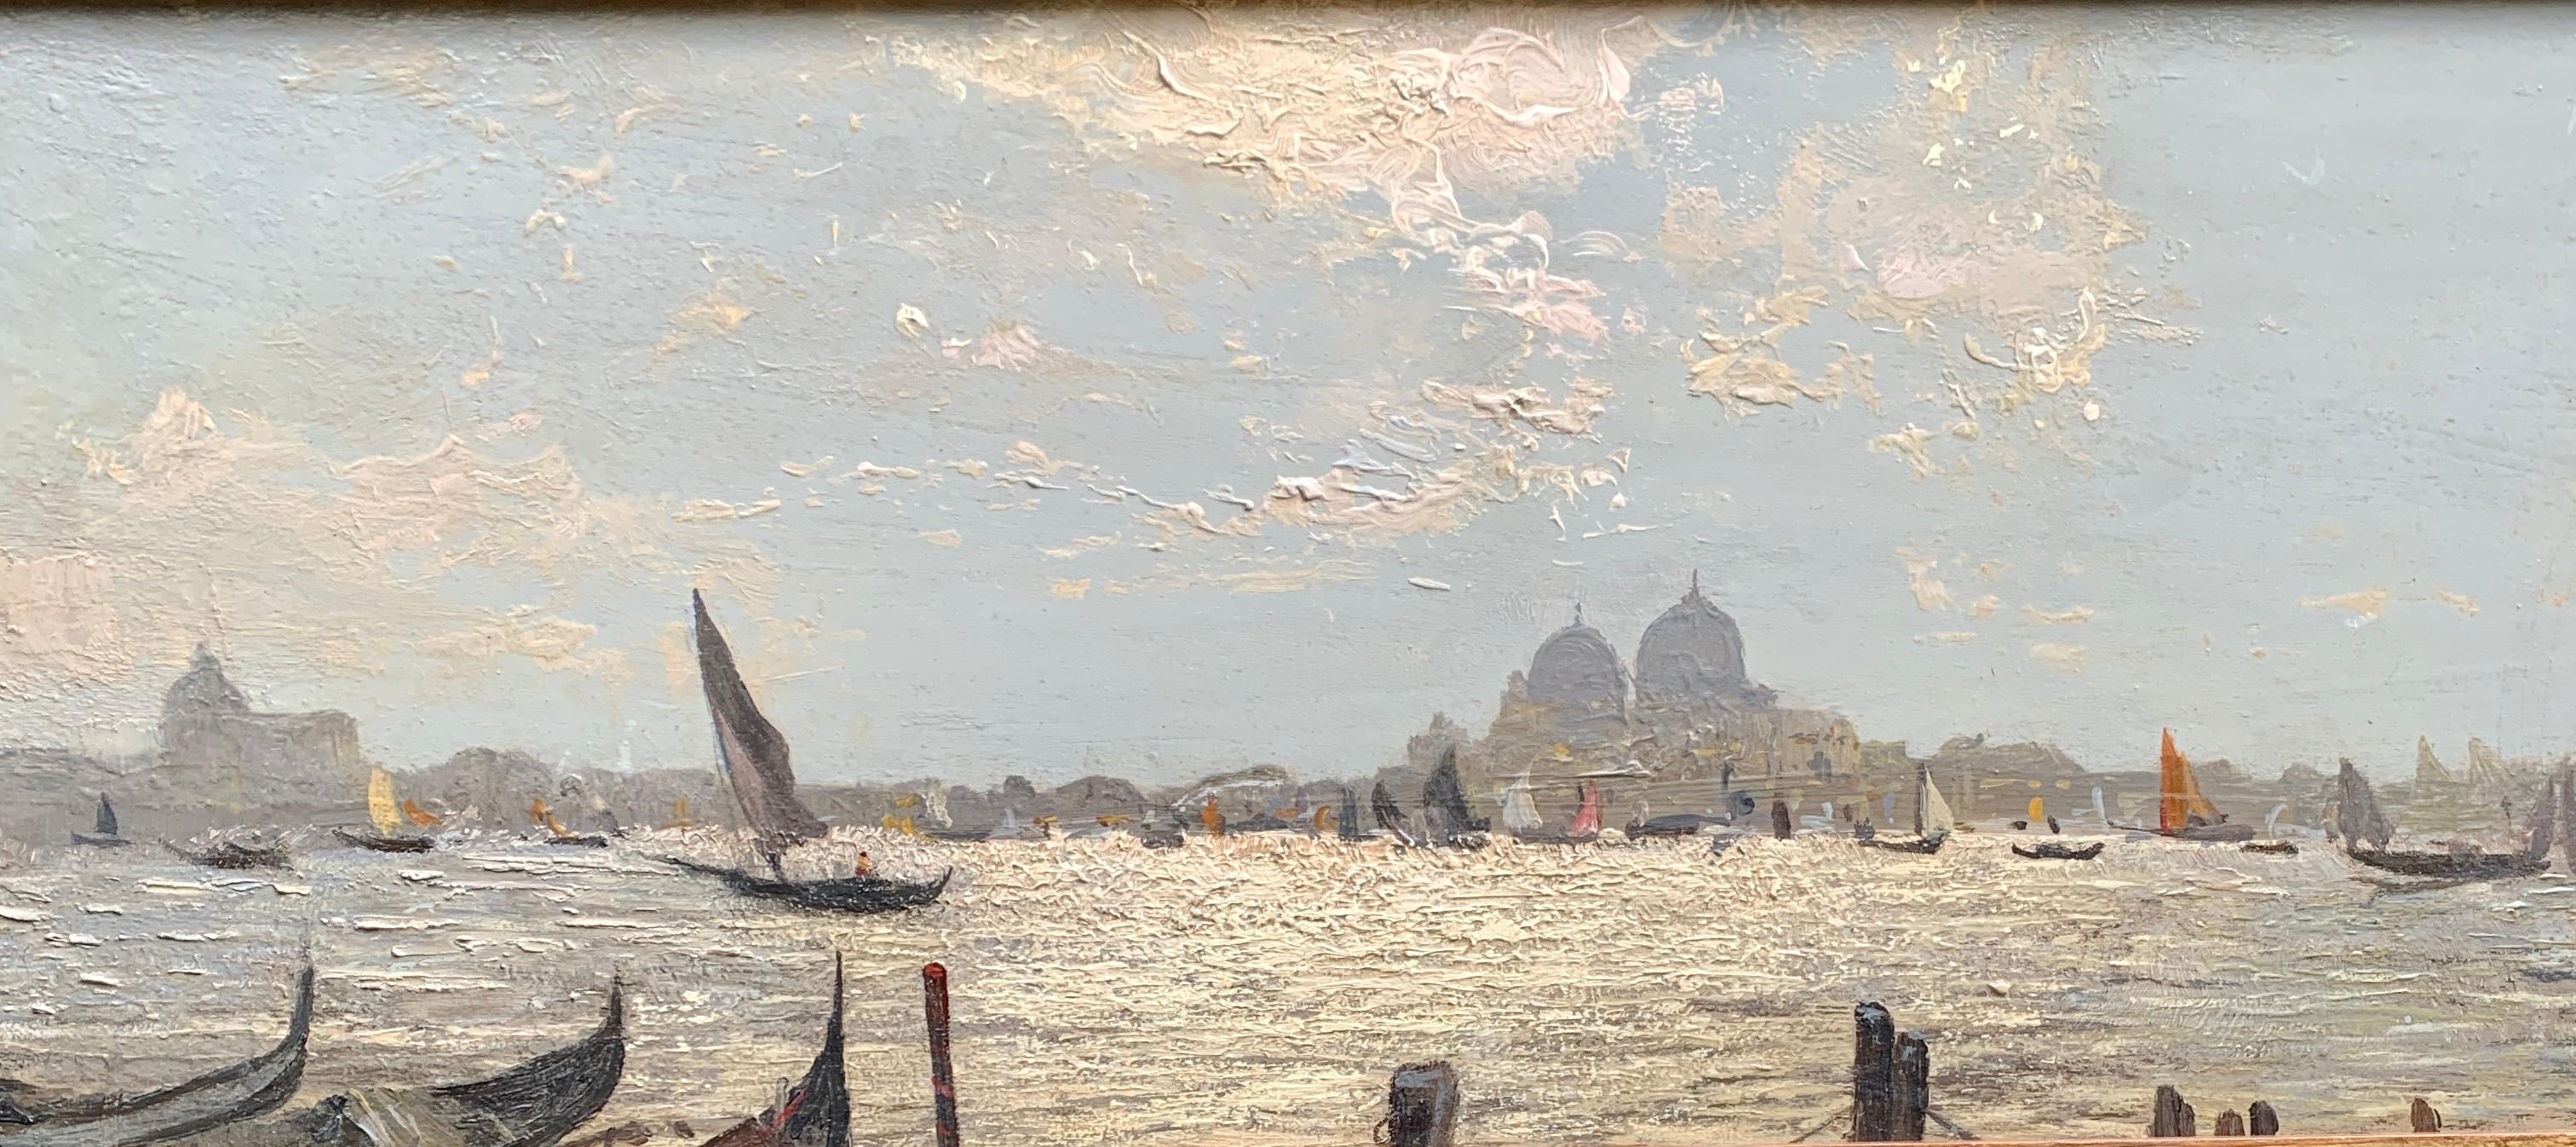 Impressionist view of Venice from the sea or Canal, with boats and gondolas 1